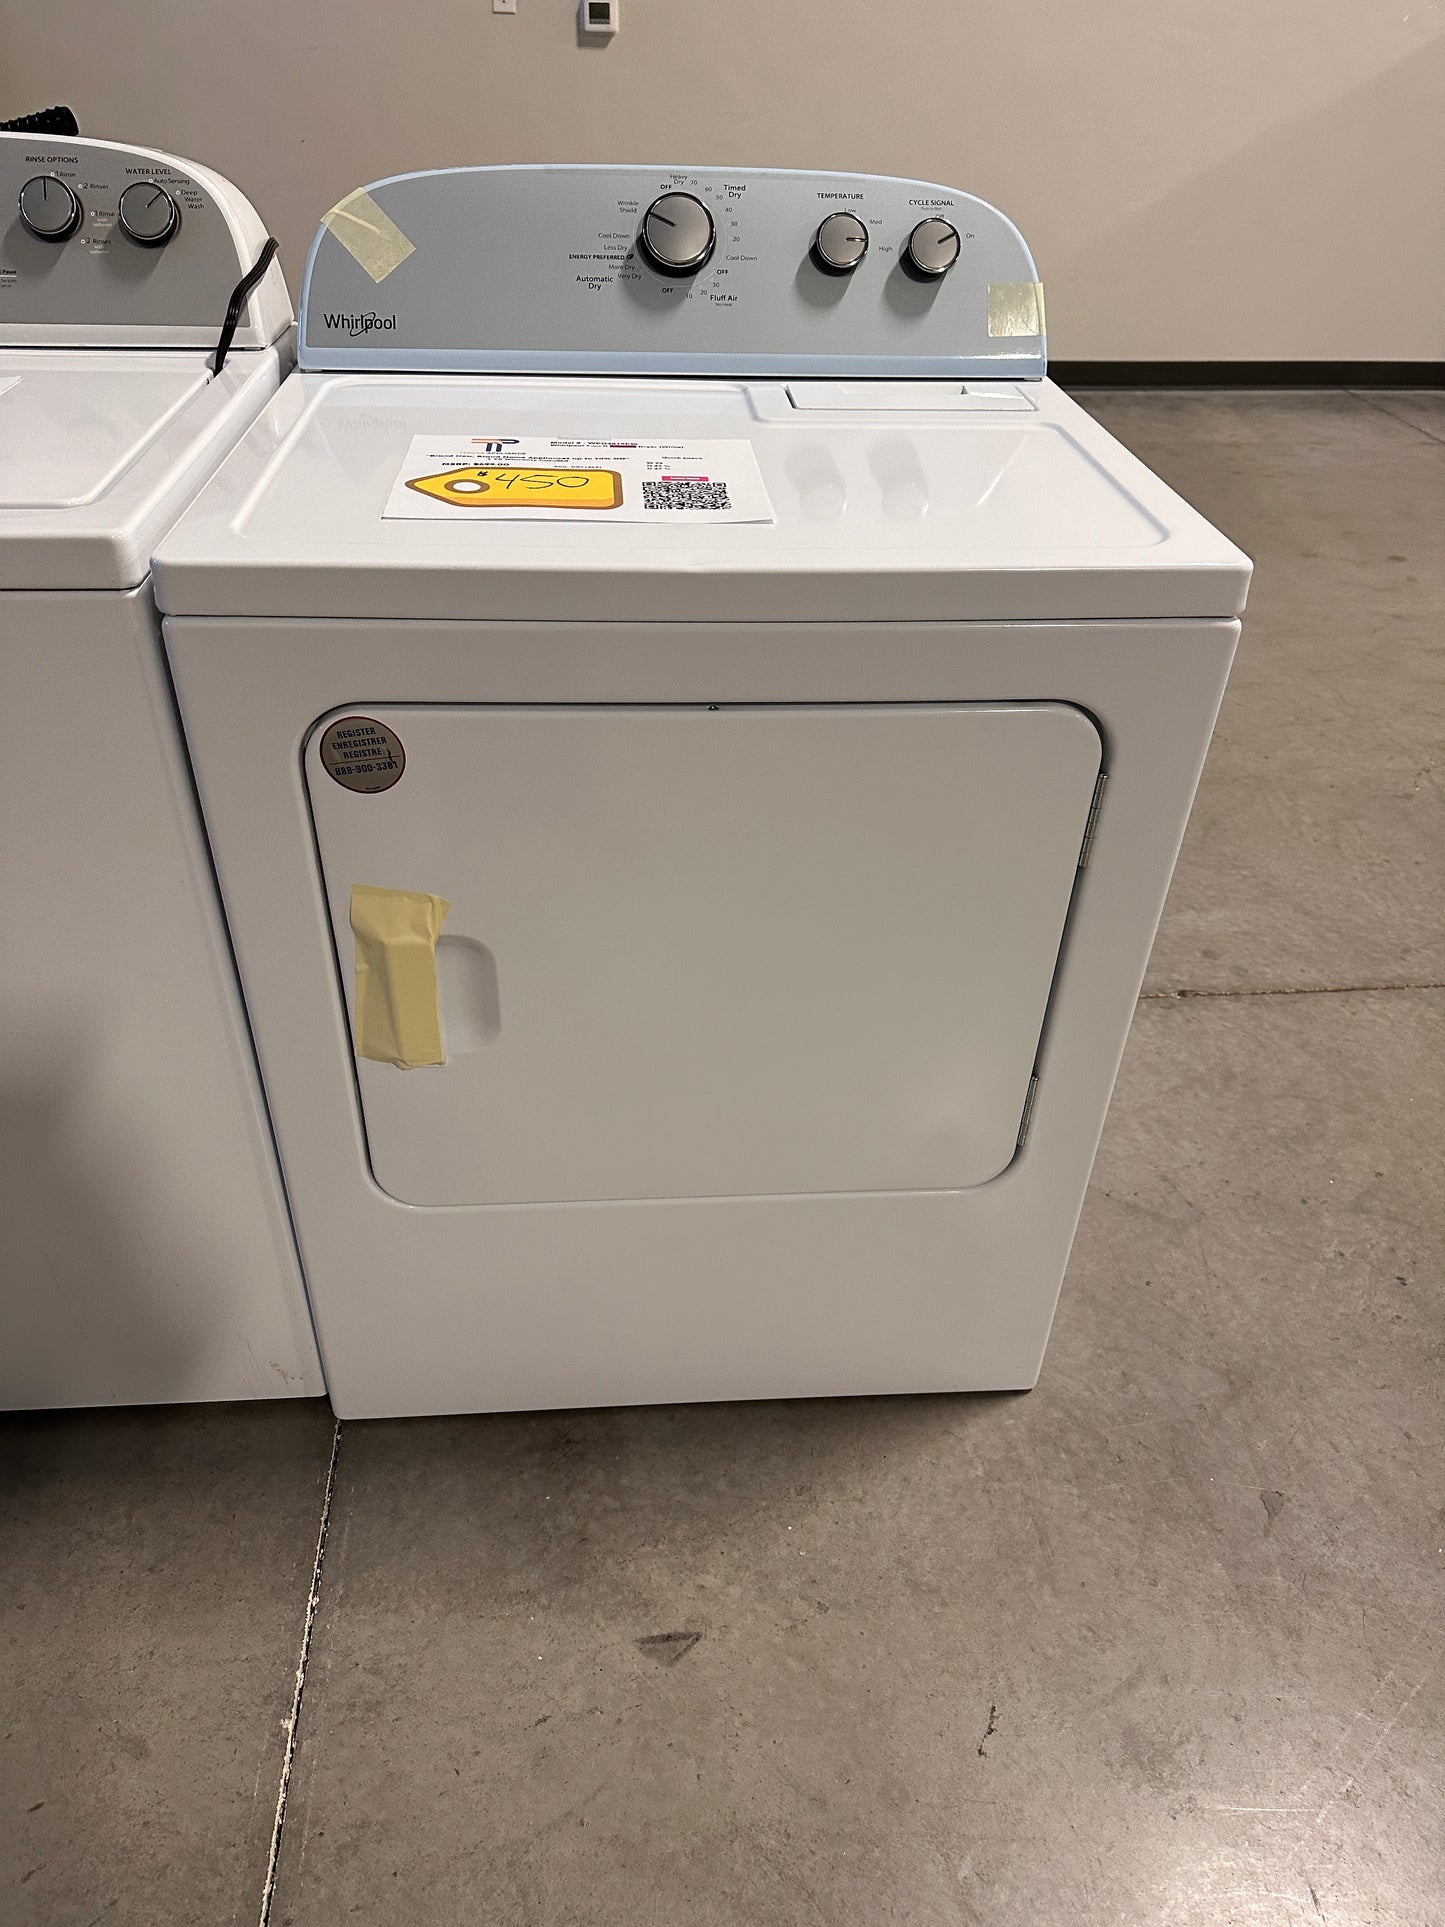 Whirlpool - 7.0 Cu. Ft. 14-Cycle Electric Dryer - White  MODEL:WED4815EW  DRY12531